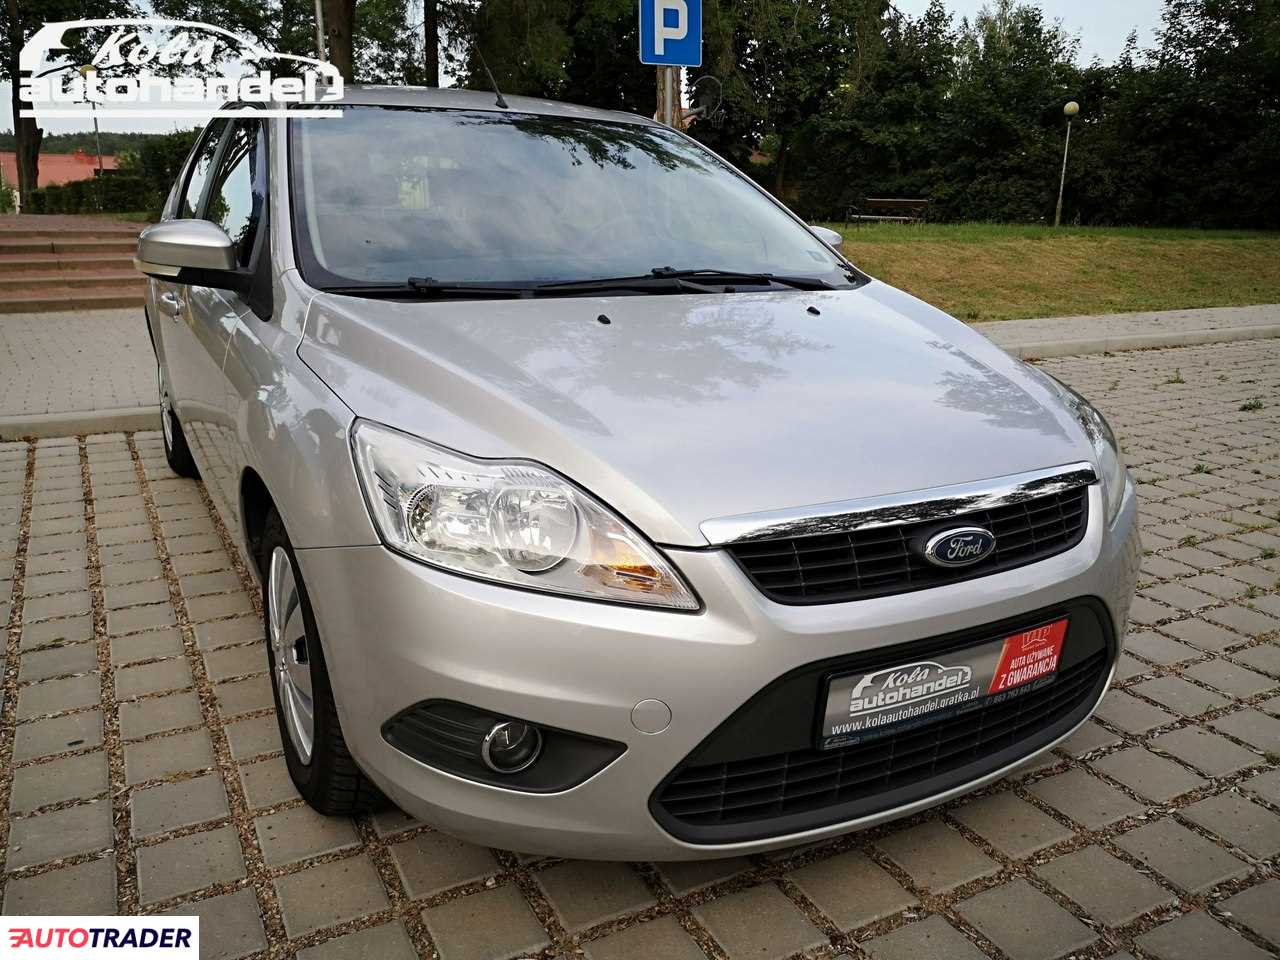 Ford Focus 2008 1.4 80 KM